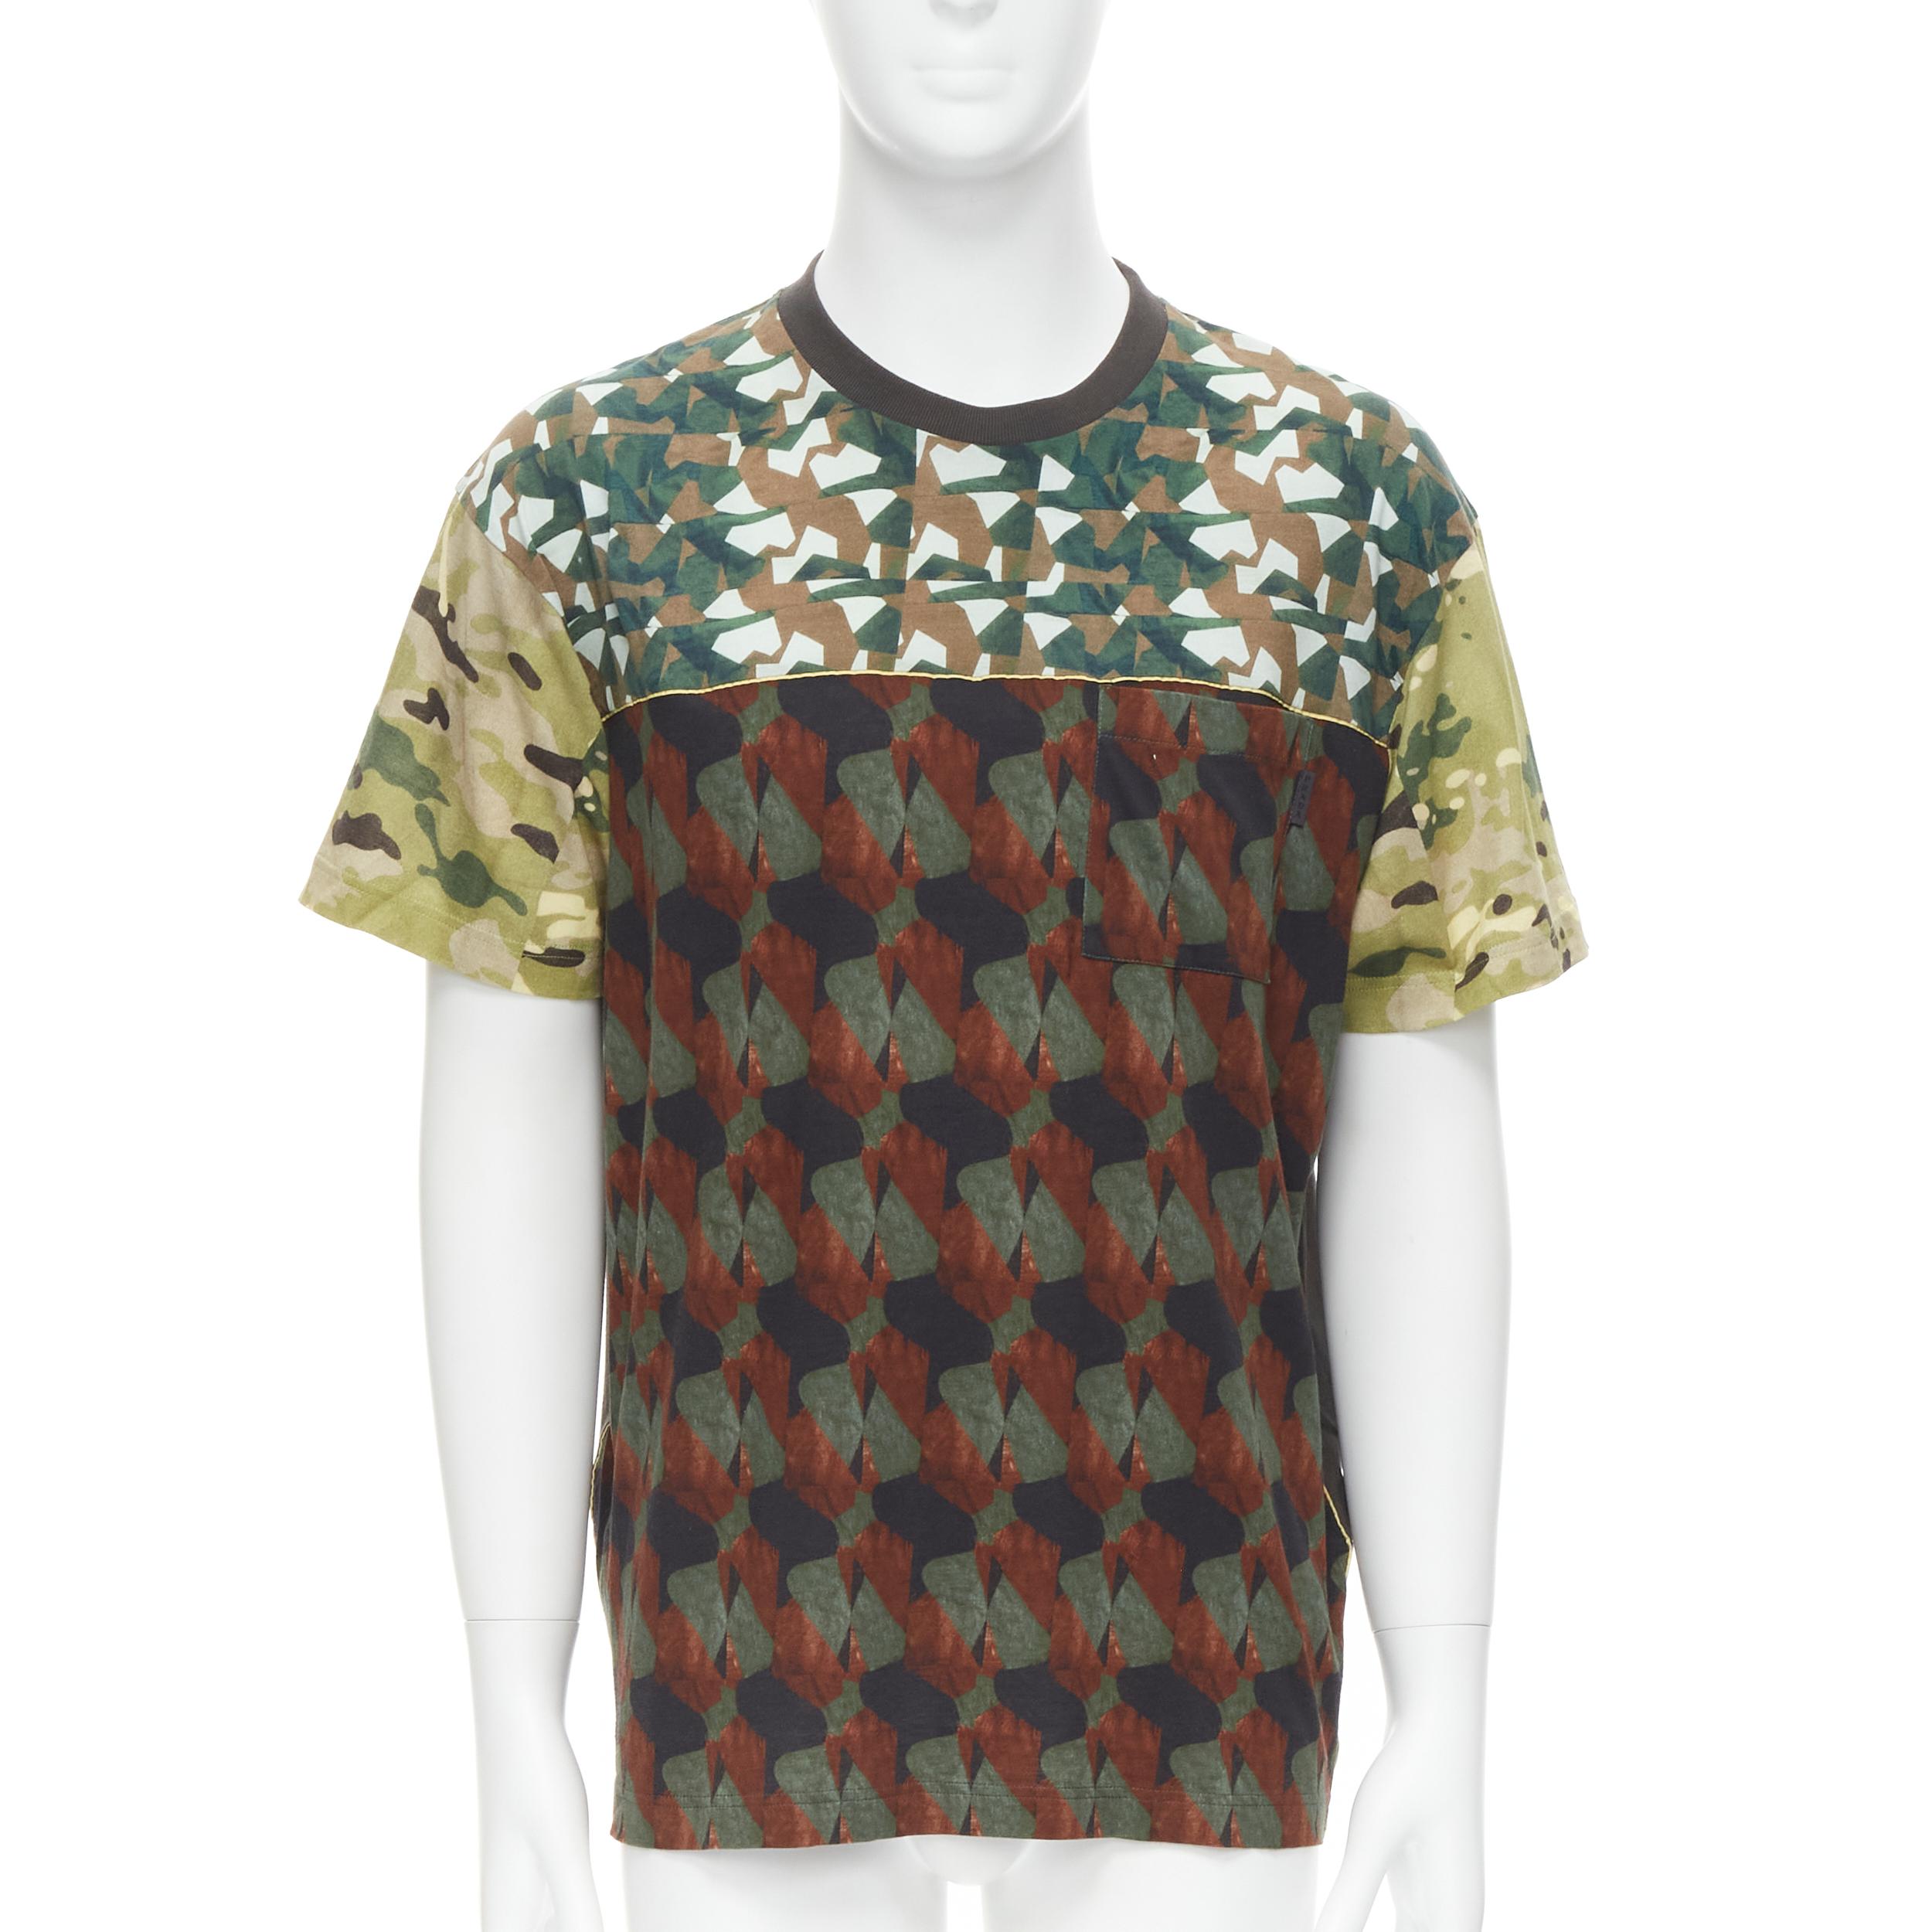 PRADA 2016 100% cotton green mixed geometric print patch pocket t shirt XL 
Reference: EDTG/A00070 
Brand: Prada 
Designer: Miuccia Prada 
Collection: 2016 
Material: Cotton 
Color: Green 
Pattern: Camouflage 
Extra Detail: Yellow piping detail.